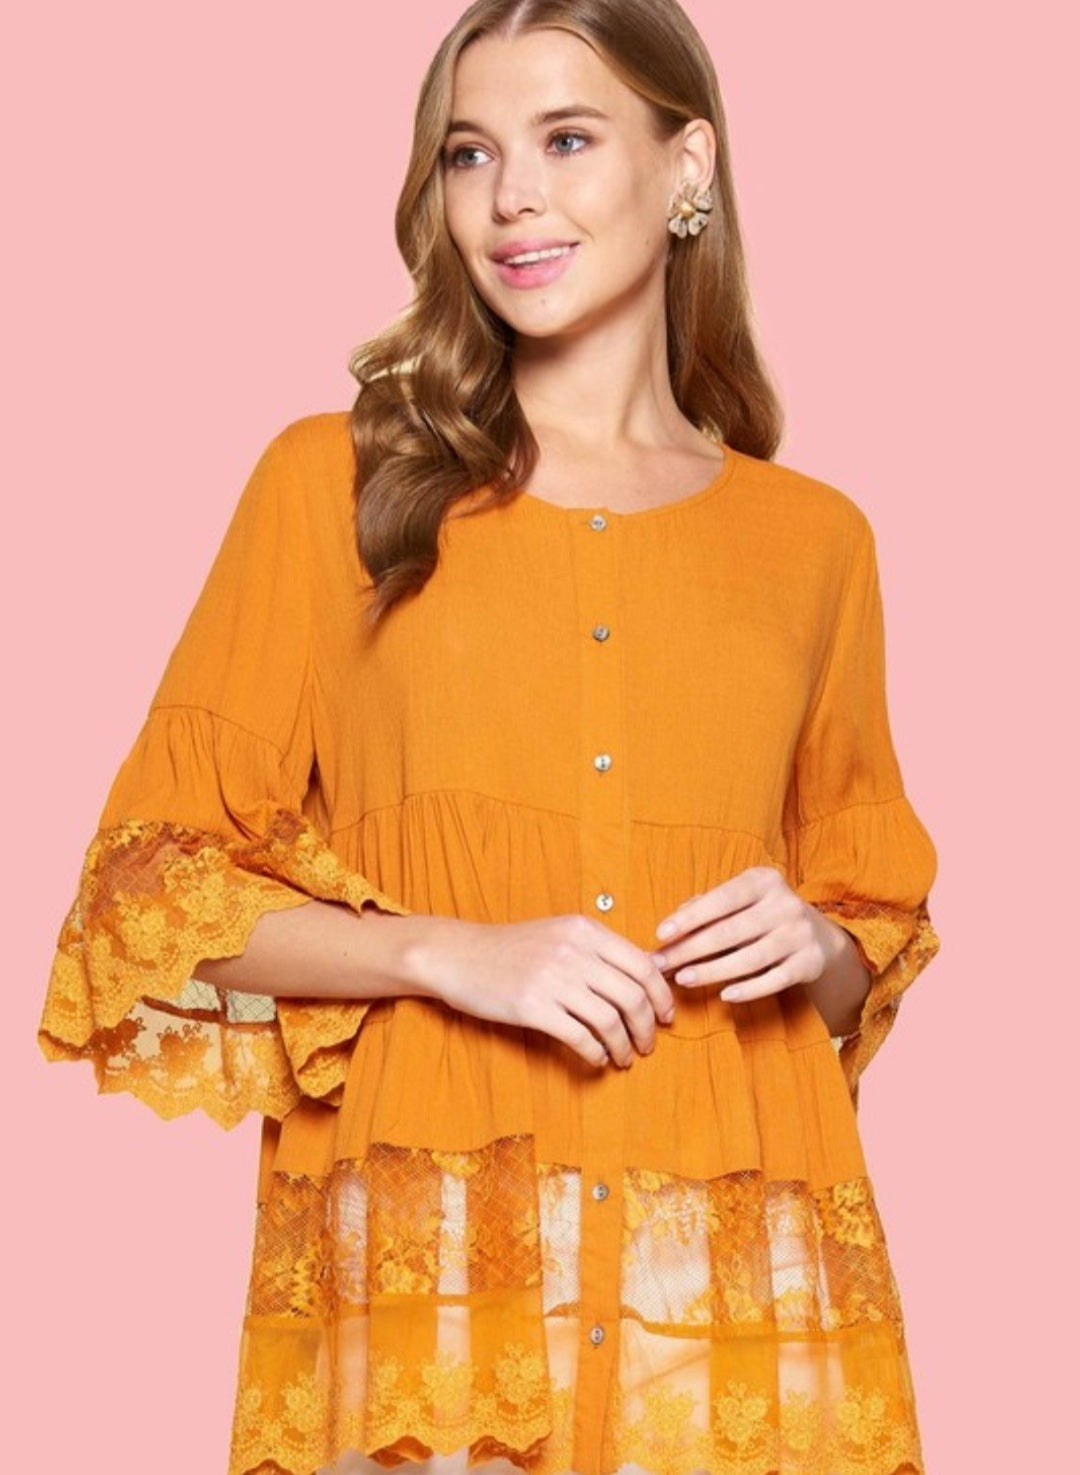 Oversized Lace Button Front Top